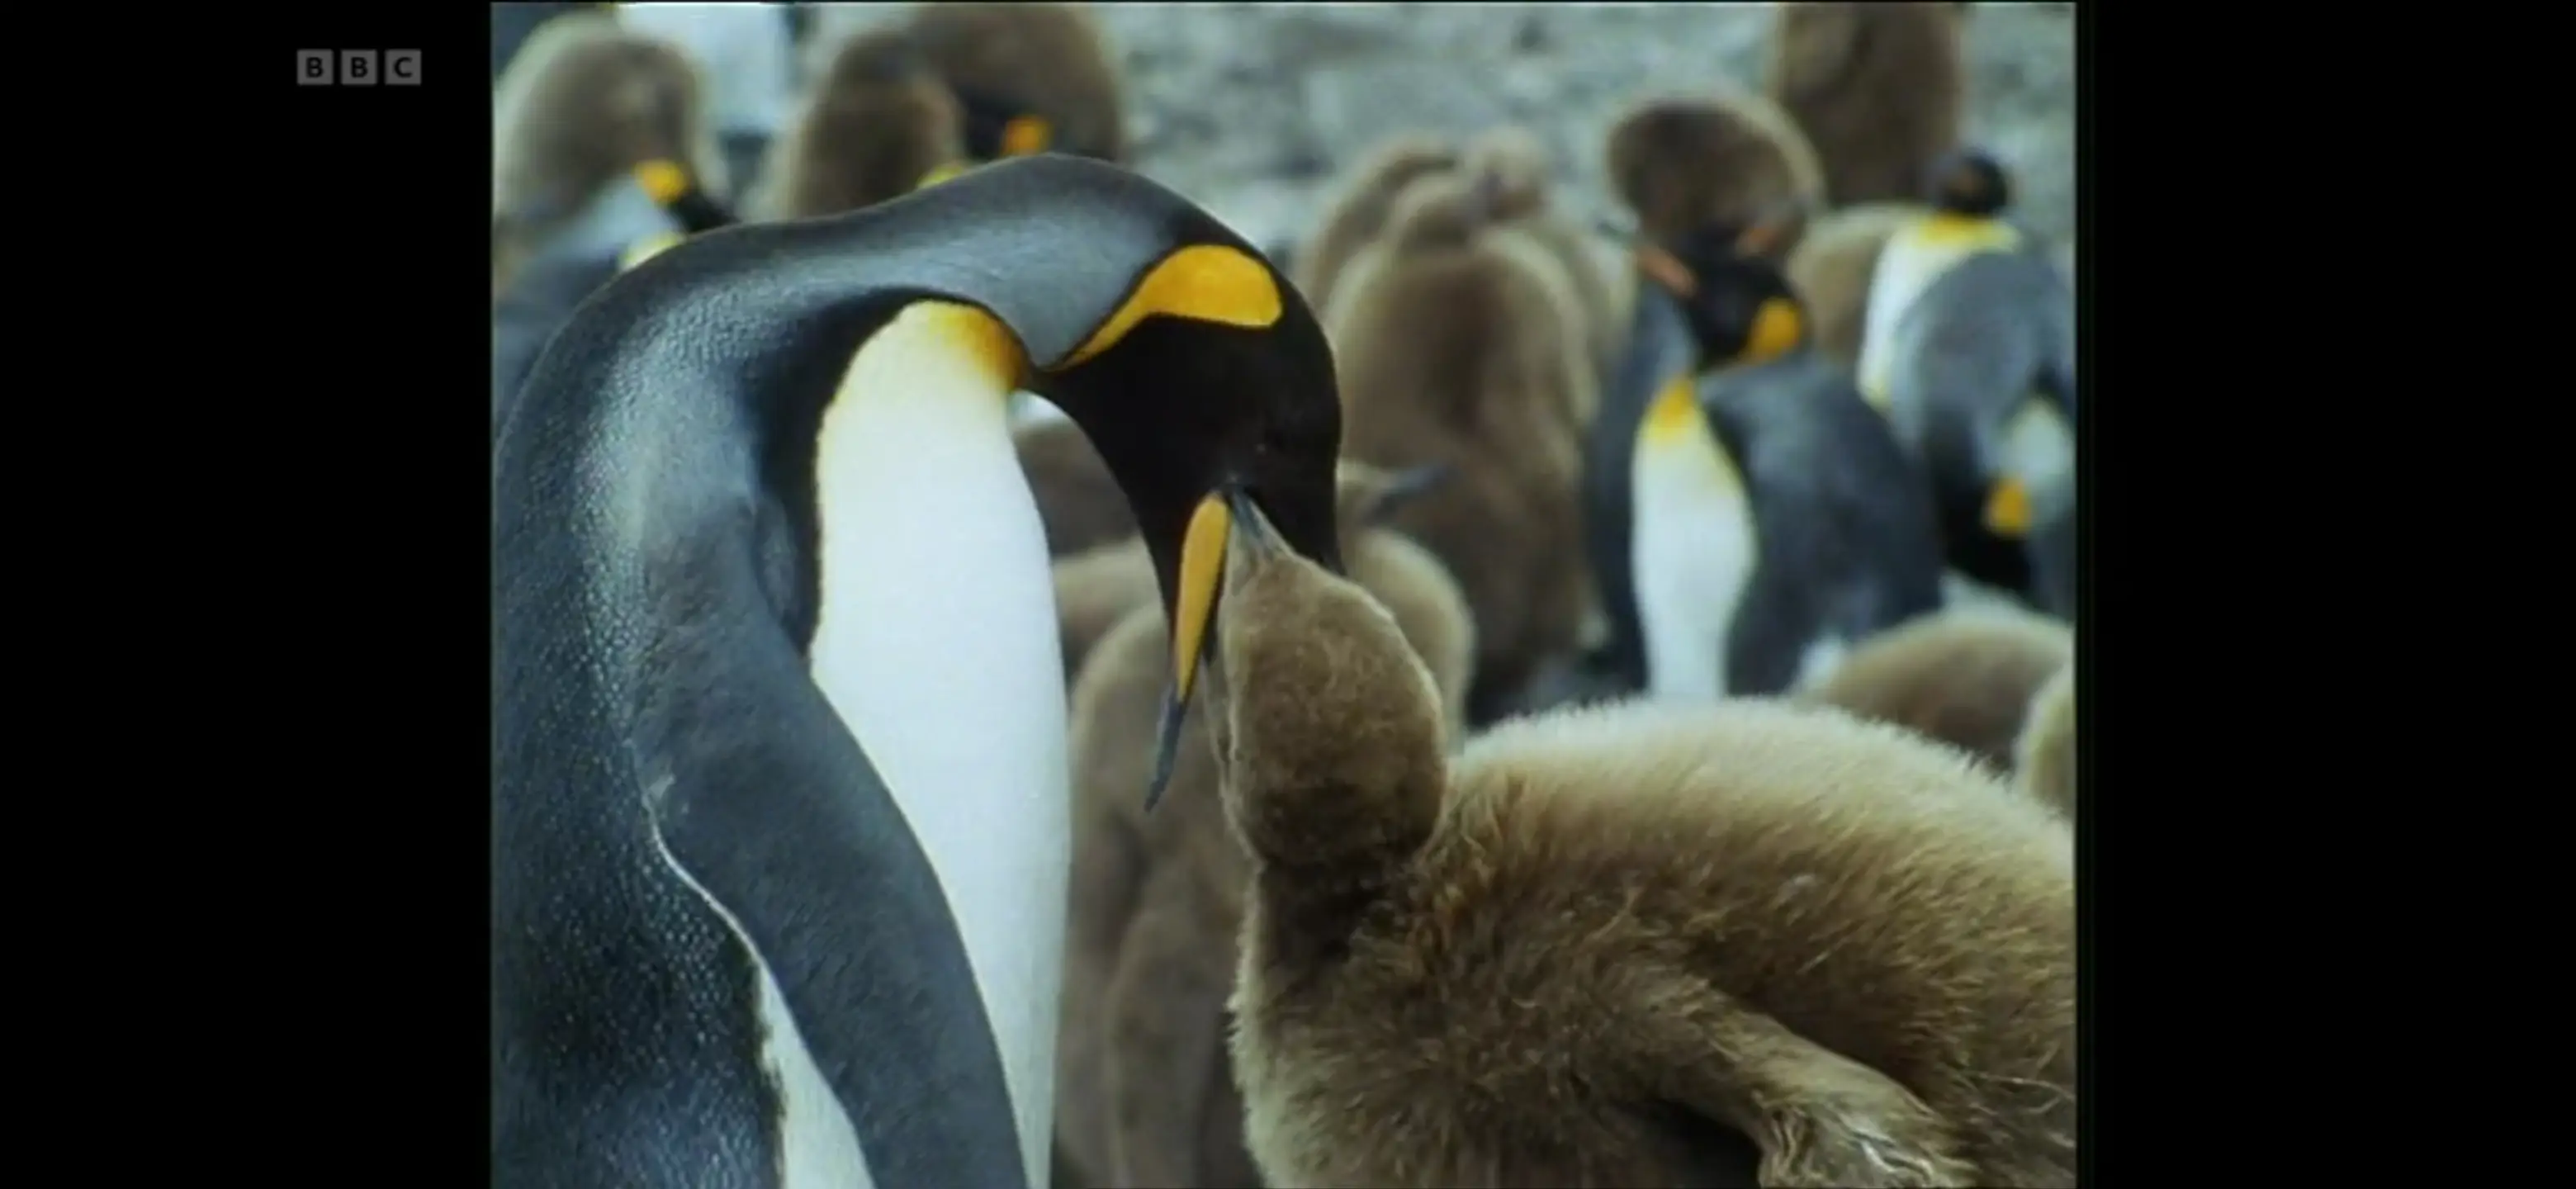 King penguin (Aptenodytes patagonicus patagonicus) as shown in Life in the Freezer - The Bountiful Sea